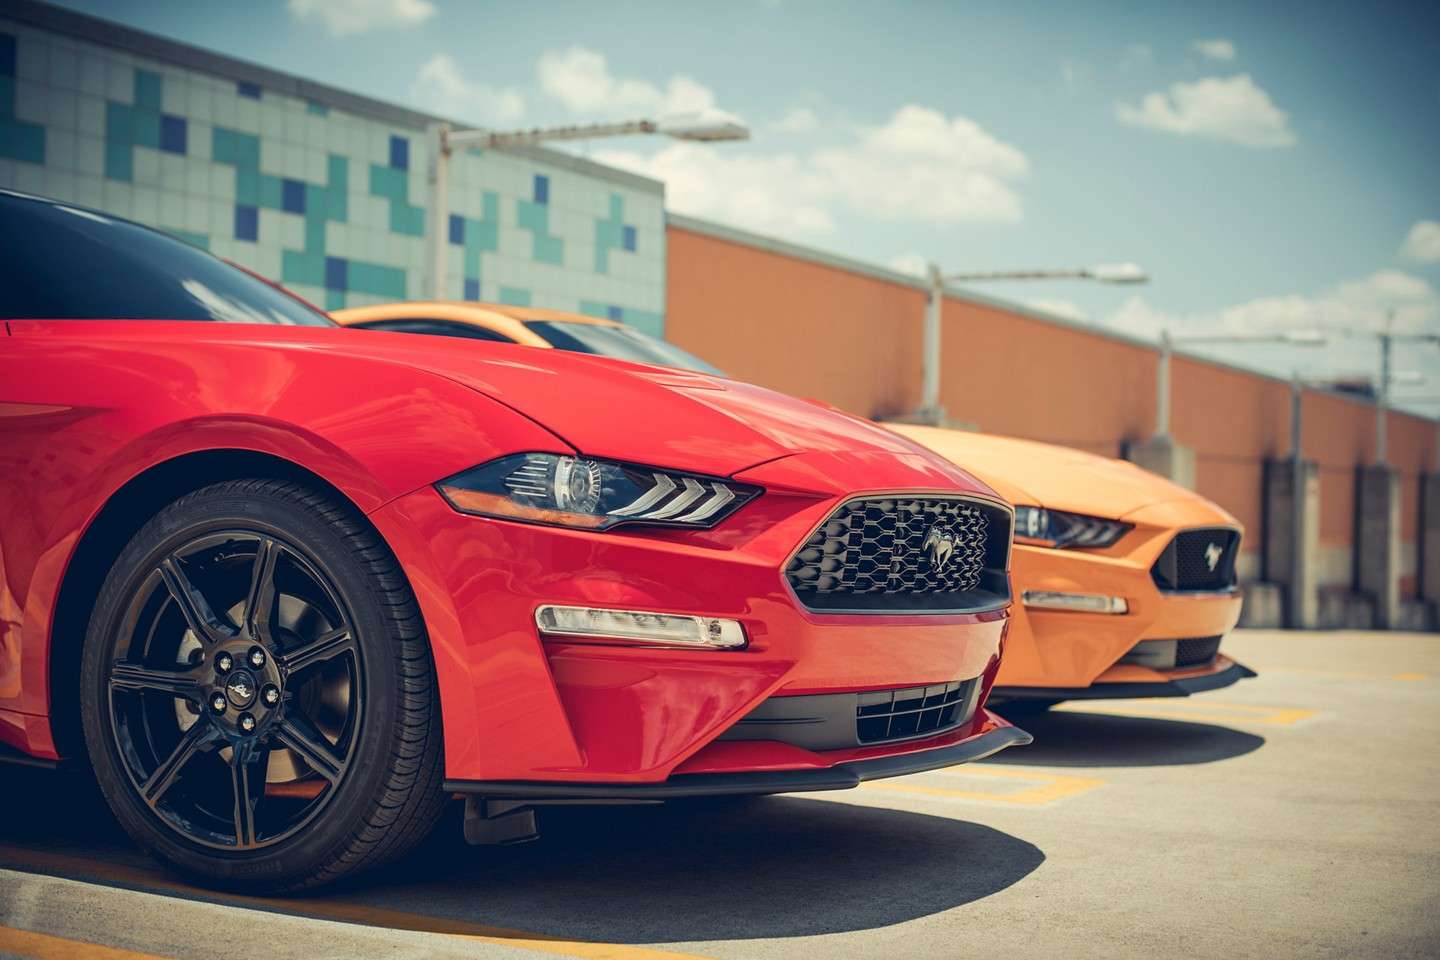 Ford Mustang 2019 Image and Wallpaper